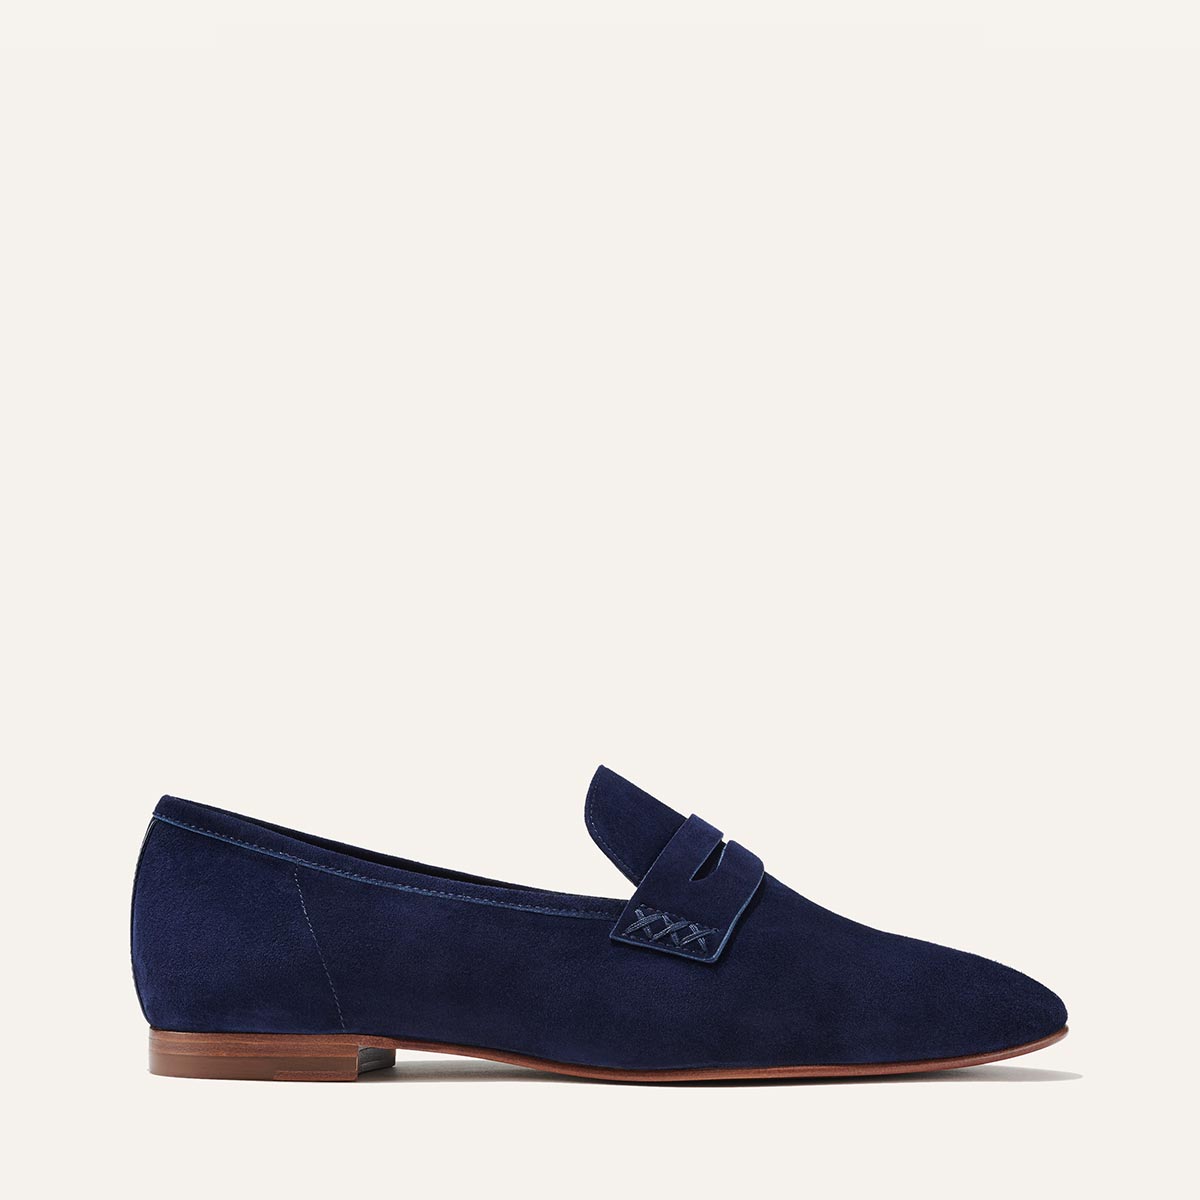 Margaux's classic and comfortable Penny loafer, made in a soft, indigo blue Italian suede